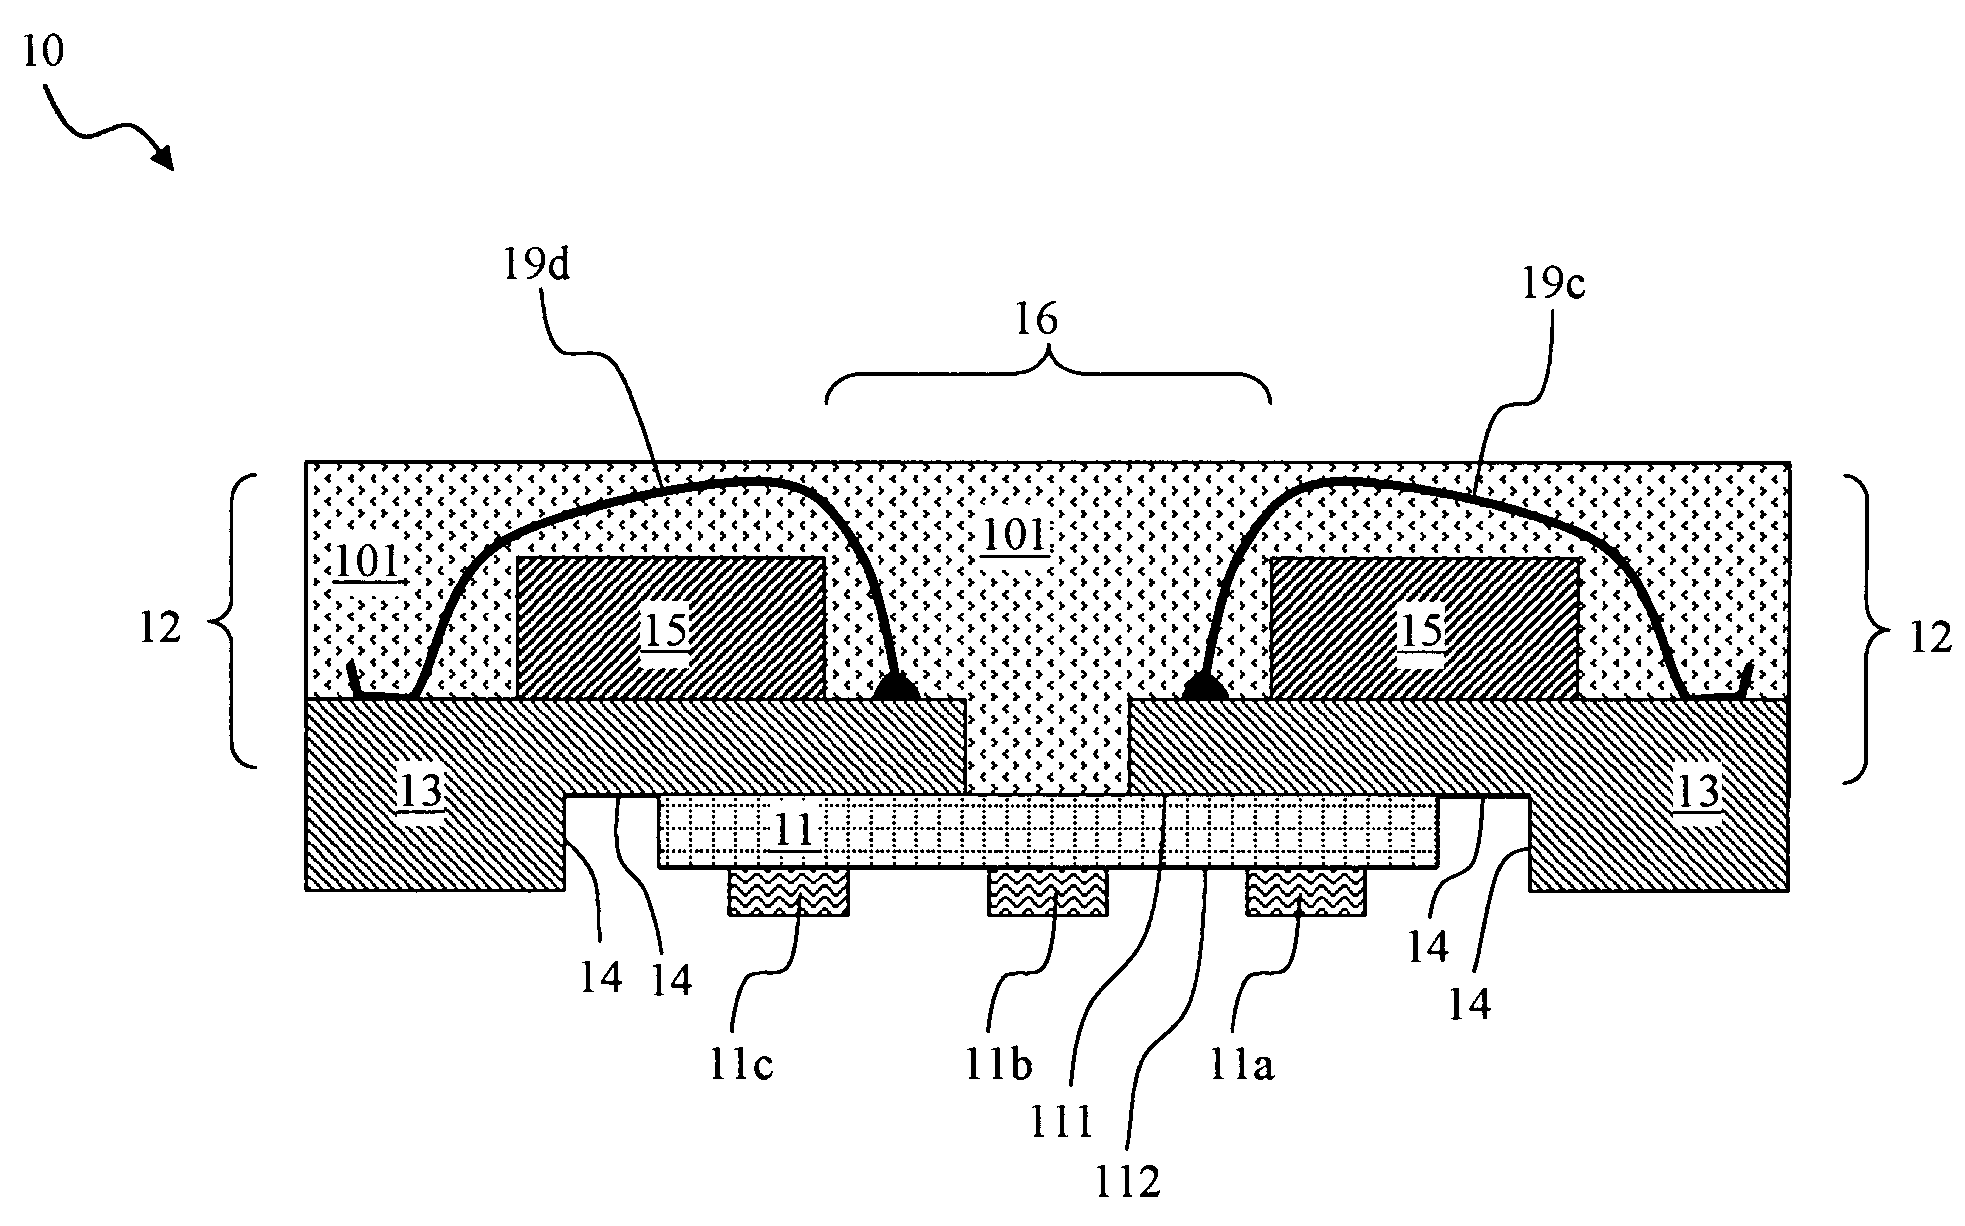 Compact power semiconductor package and method with stacked inductor and integrated circuit die